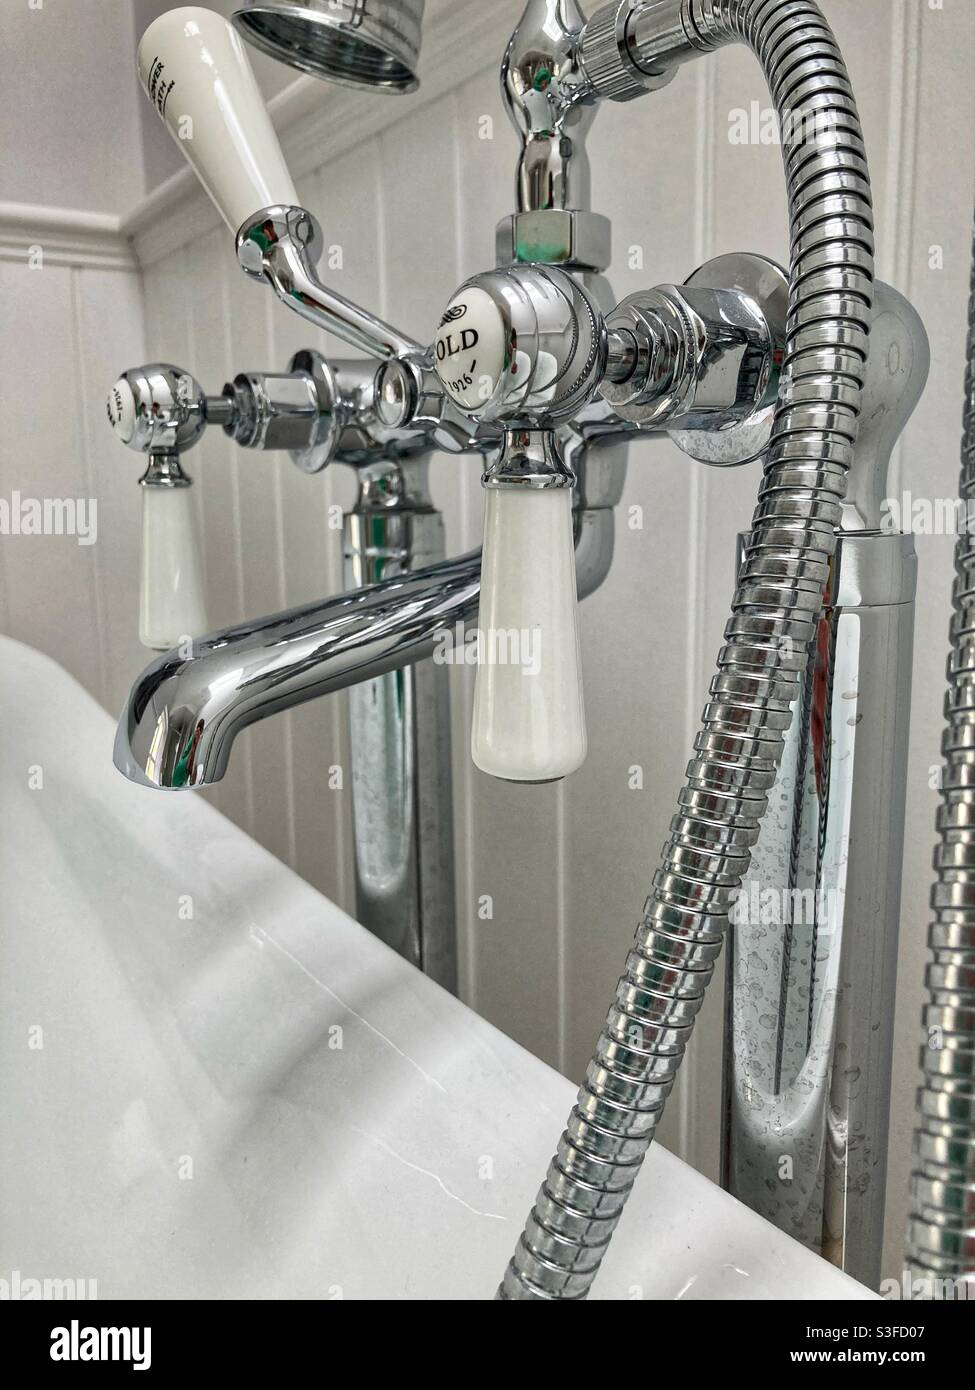 Bath taps / bathroom taps / hot tap / cold tap / basin / water supply Stock Photo